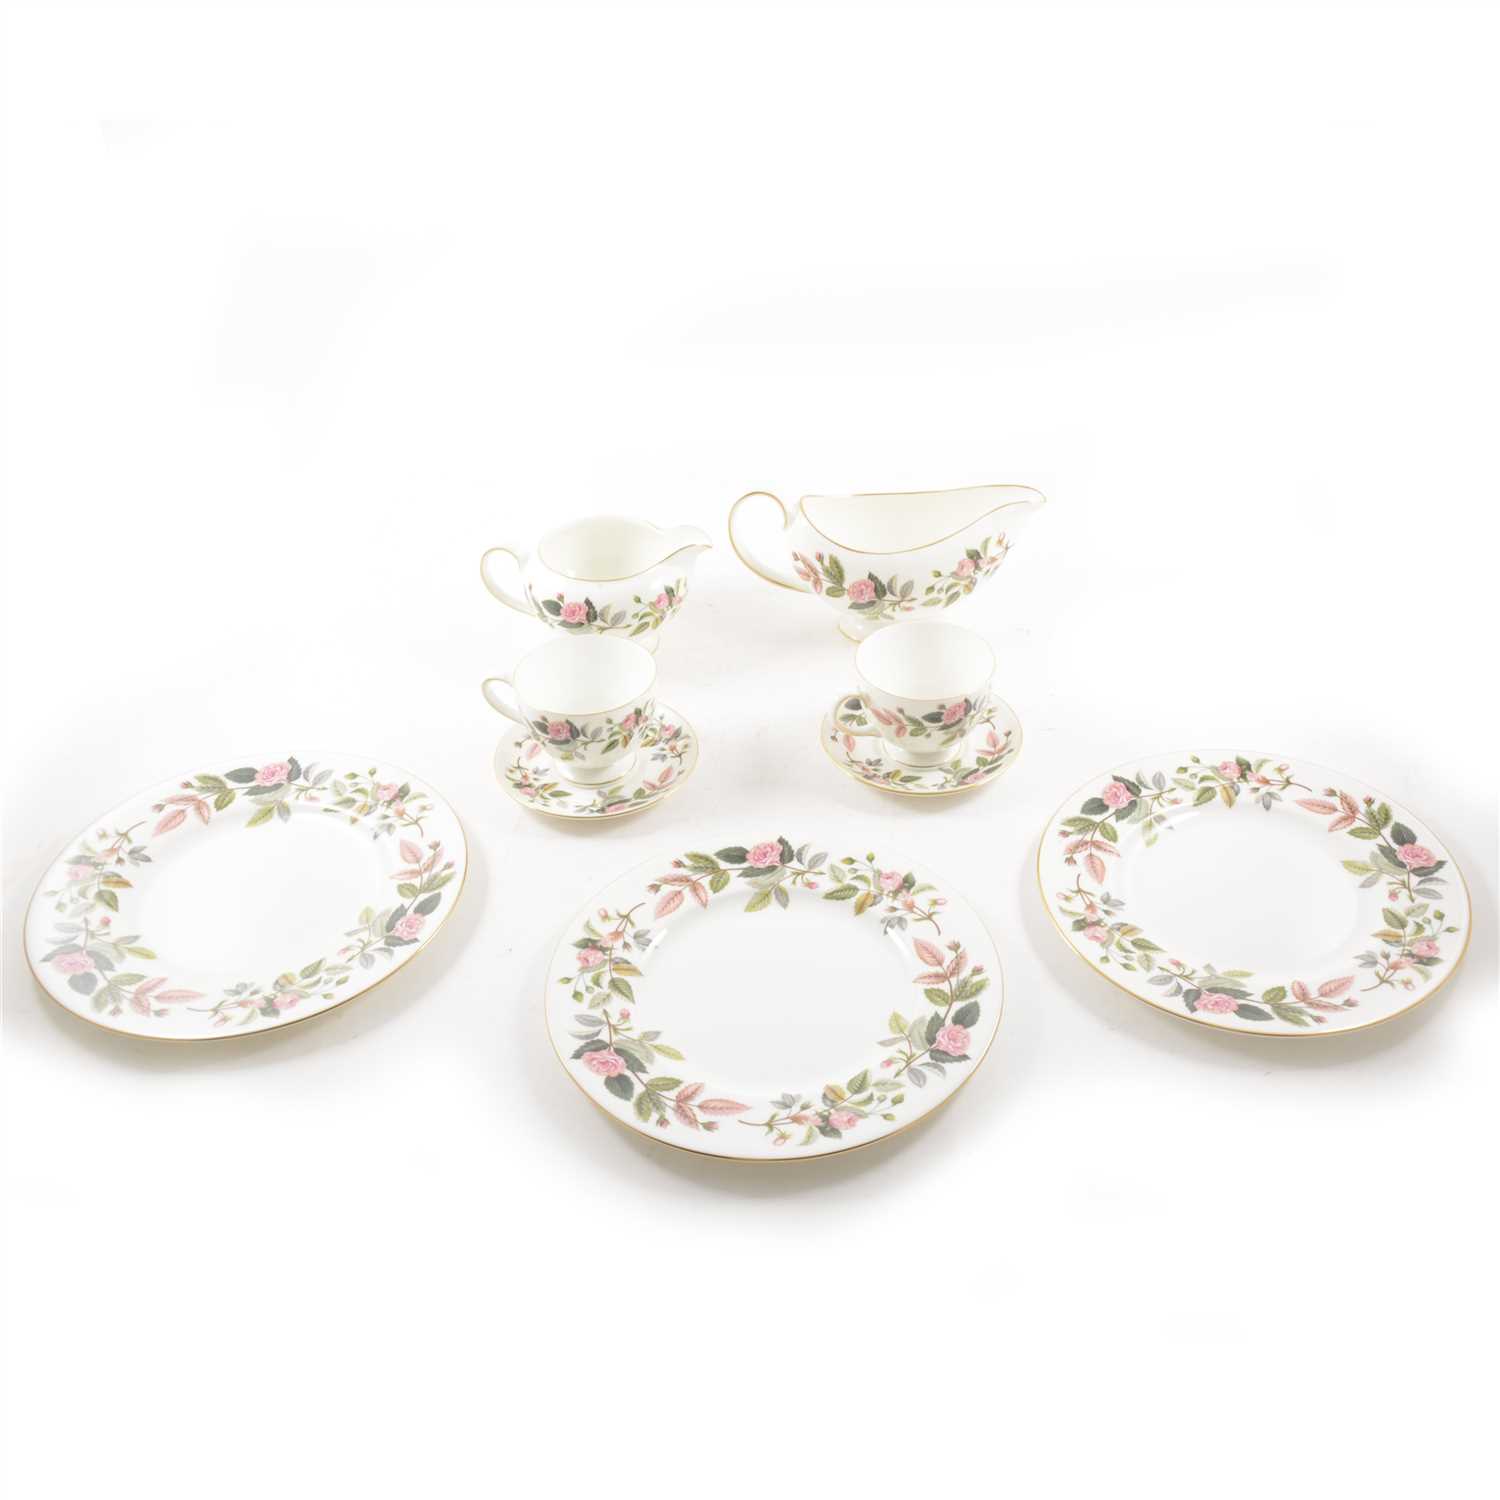 Lot 77 - Extensive Wedgwood bone china table service, Hathaway Rose pattern, including dinner, tea and coffee wares.